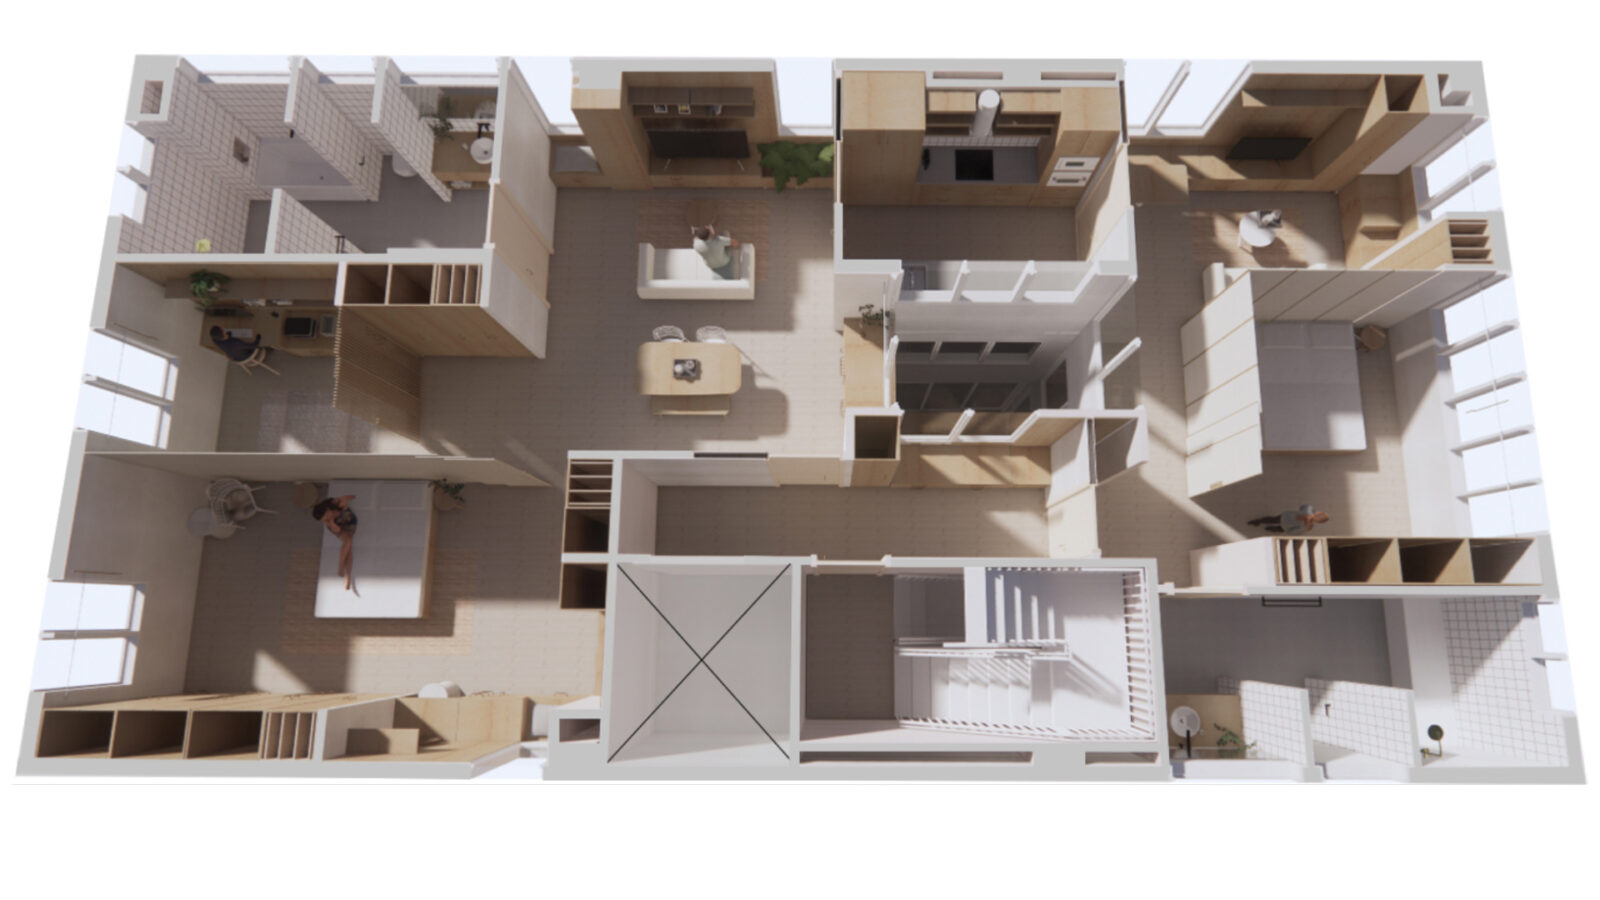 The following image is an example of one of the potential floor plan arrangements as a result of the moveable walls and joinery. The apartments work by utilising one module that can be adapted to suit the different phase’s of a users life. Each apartment floor is designed in order to allow a large family apartment to be converted into two smaller units by providing shared spaces such as a shared kitchen and entrance.